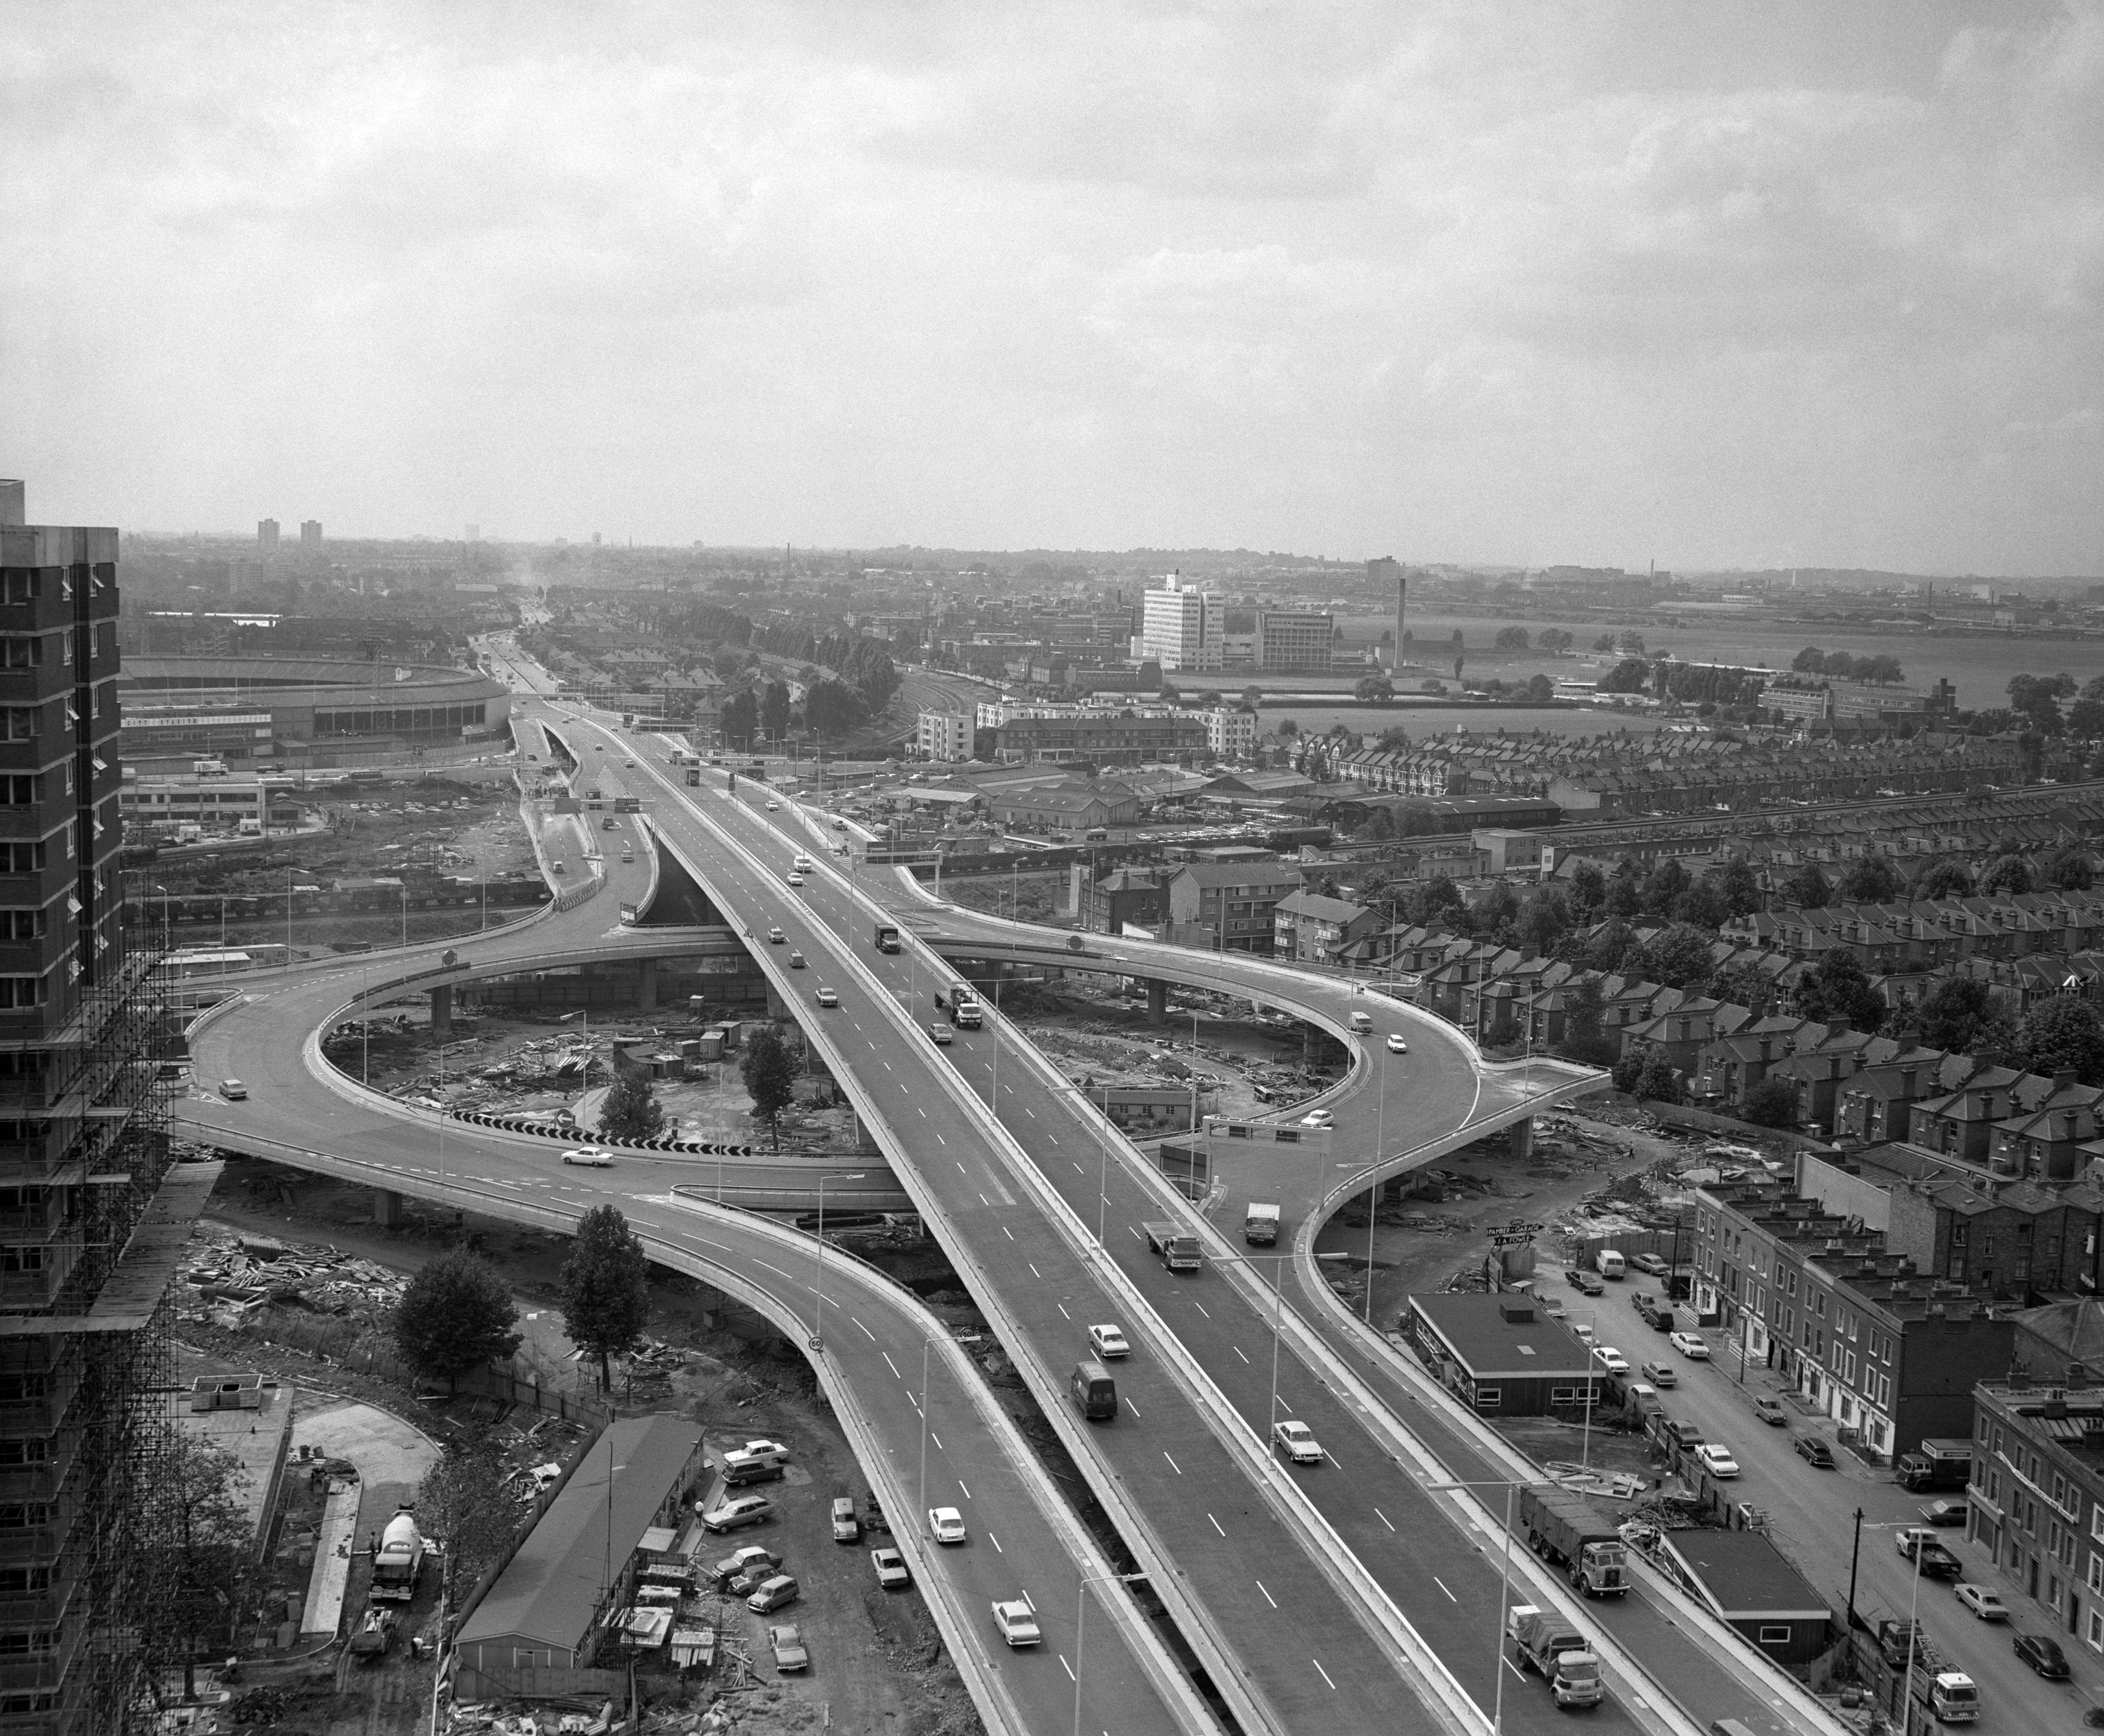 A general view of the finished Western Avenue Extension, known as Westway. It is a 2.5 mile long elevated dual carriageway section of the A40 route in west London running from Paddington to North Kensington. It was built to relieve congestion at Shepherd's Bush caused by traffic from Western Avenue. Top left is White City Stadium.